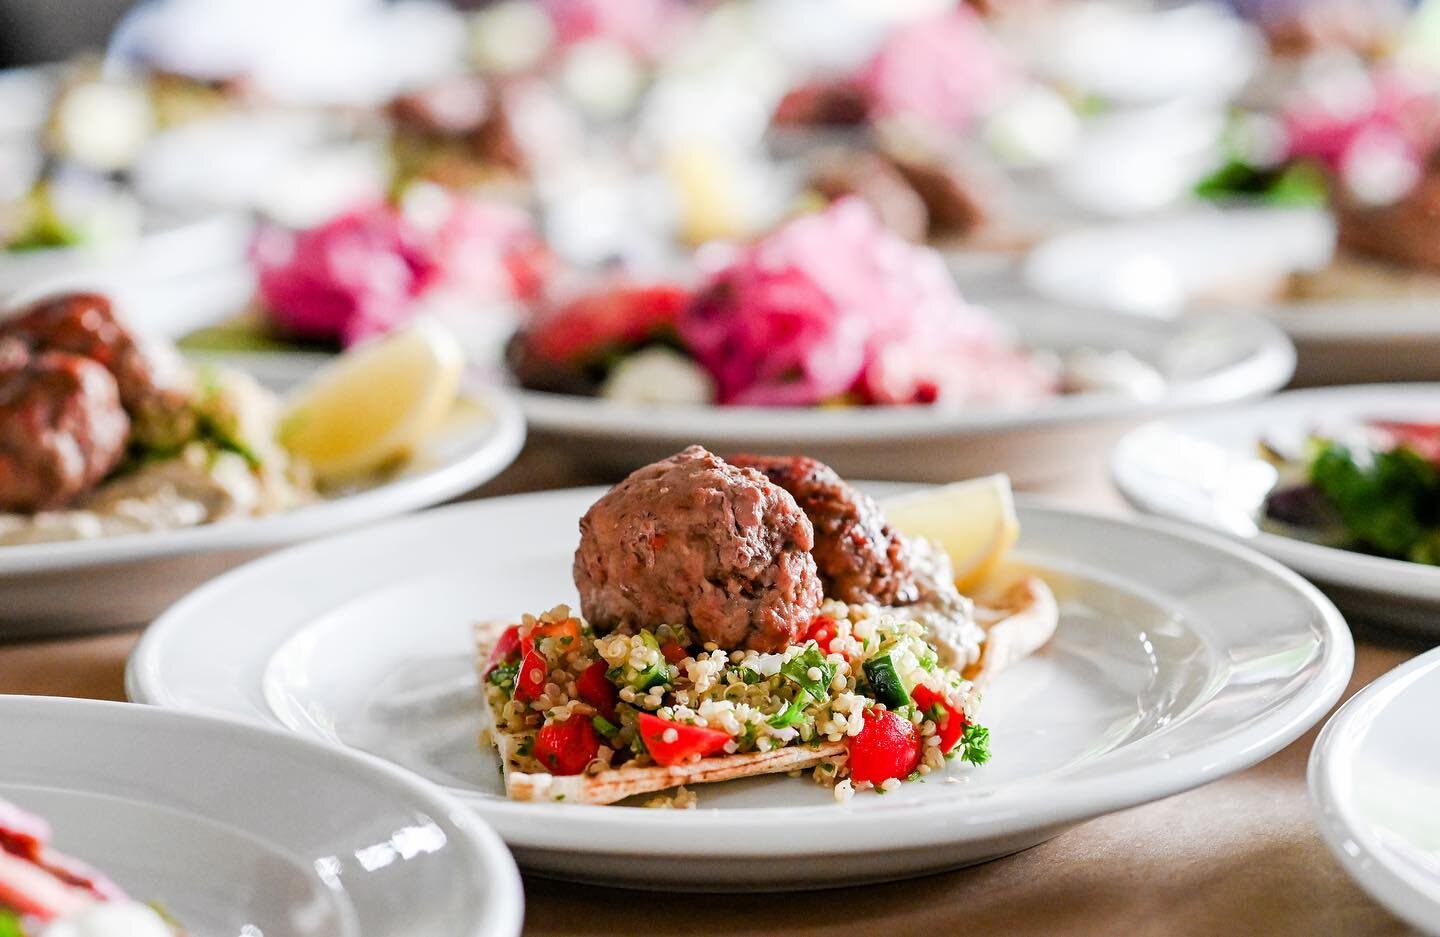 Coming in with a strong start for wedding season with a four course feast for 100+ people.

Many sore feet for our hard working team today but worth it, as always!

Pictured here is one of our popular entrees, lamb kofta with smokey eggplant pur&eacu